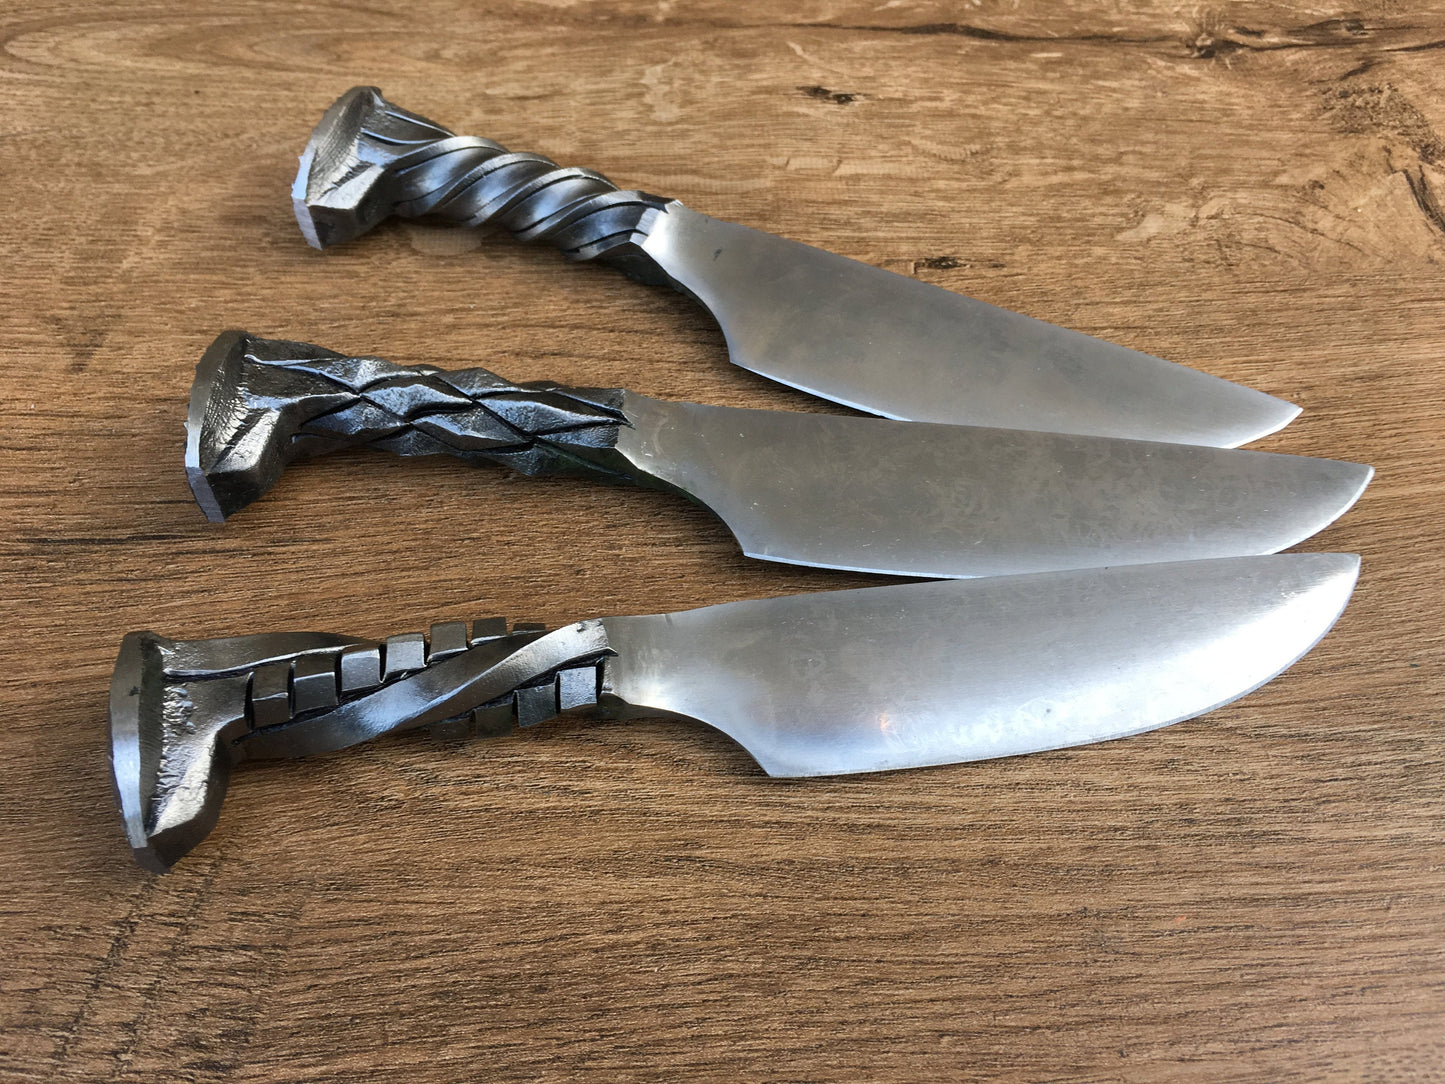 A set of 3 railroad spike knives, railroad spike knife, iron gifts,  industrial art, steampunk, iron anniversary gift, iron gift for him